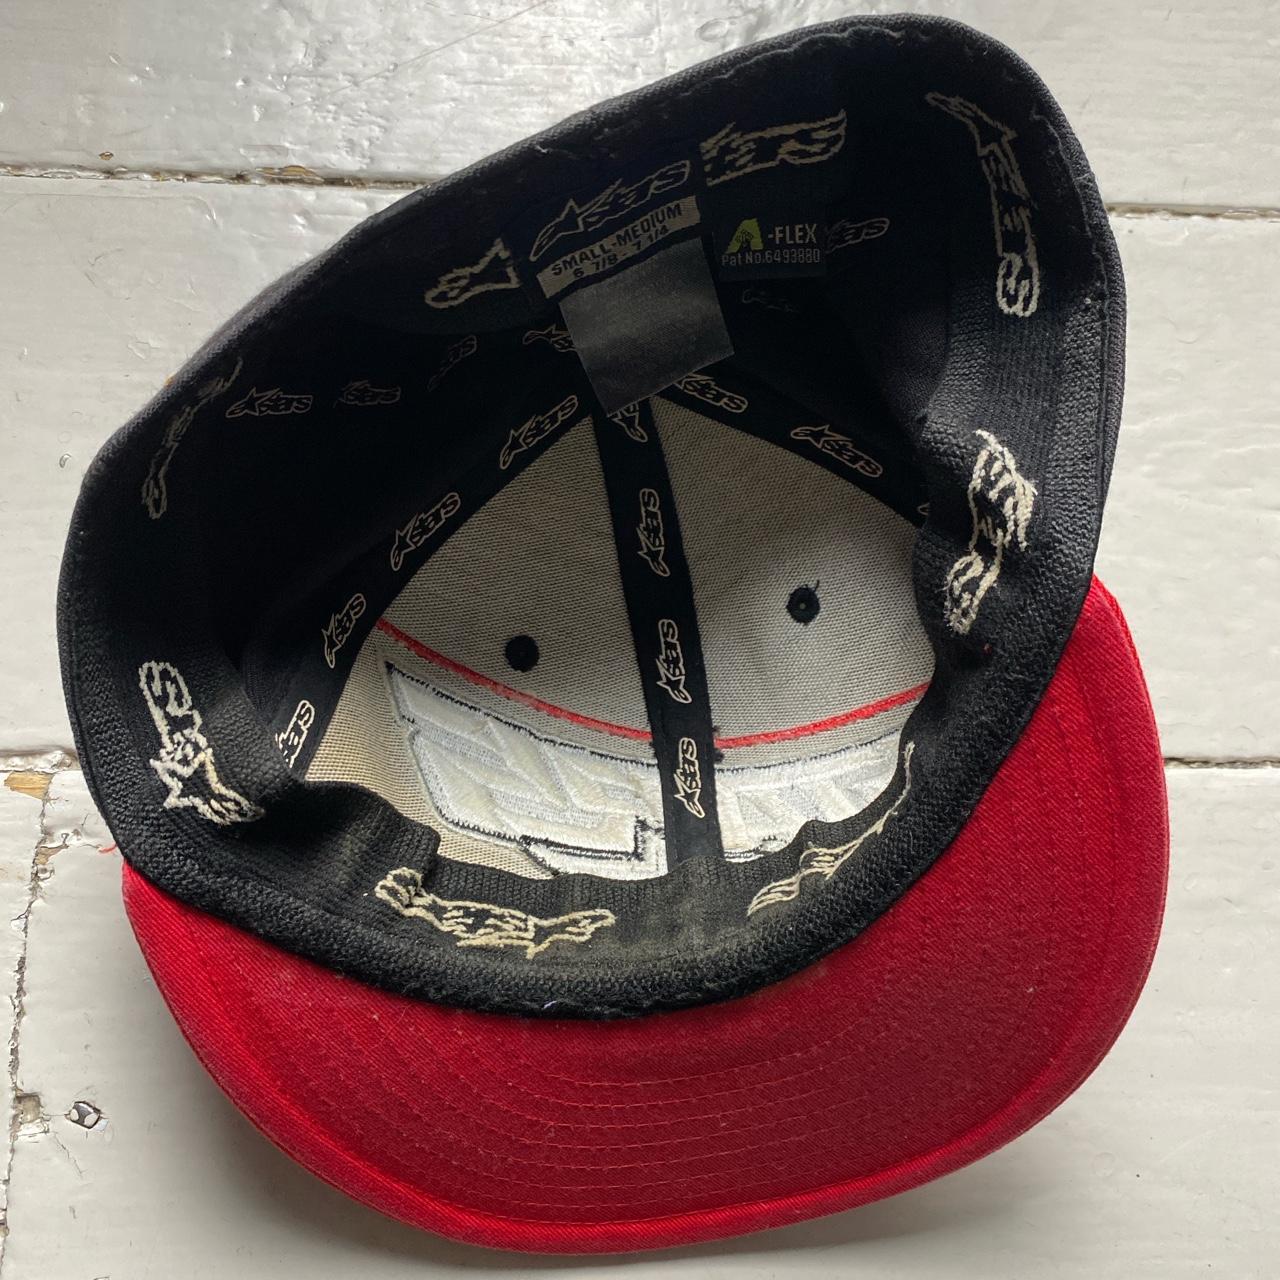 Allstars Black Red and White Fitted Adjustable Fit Cap